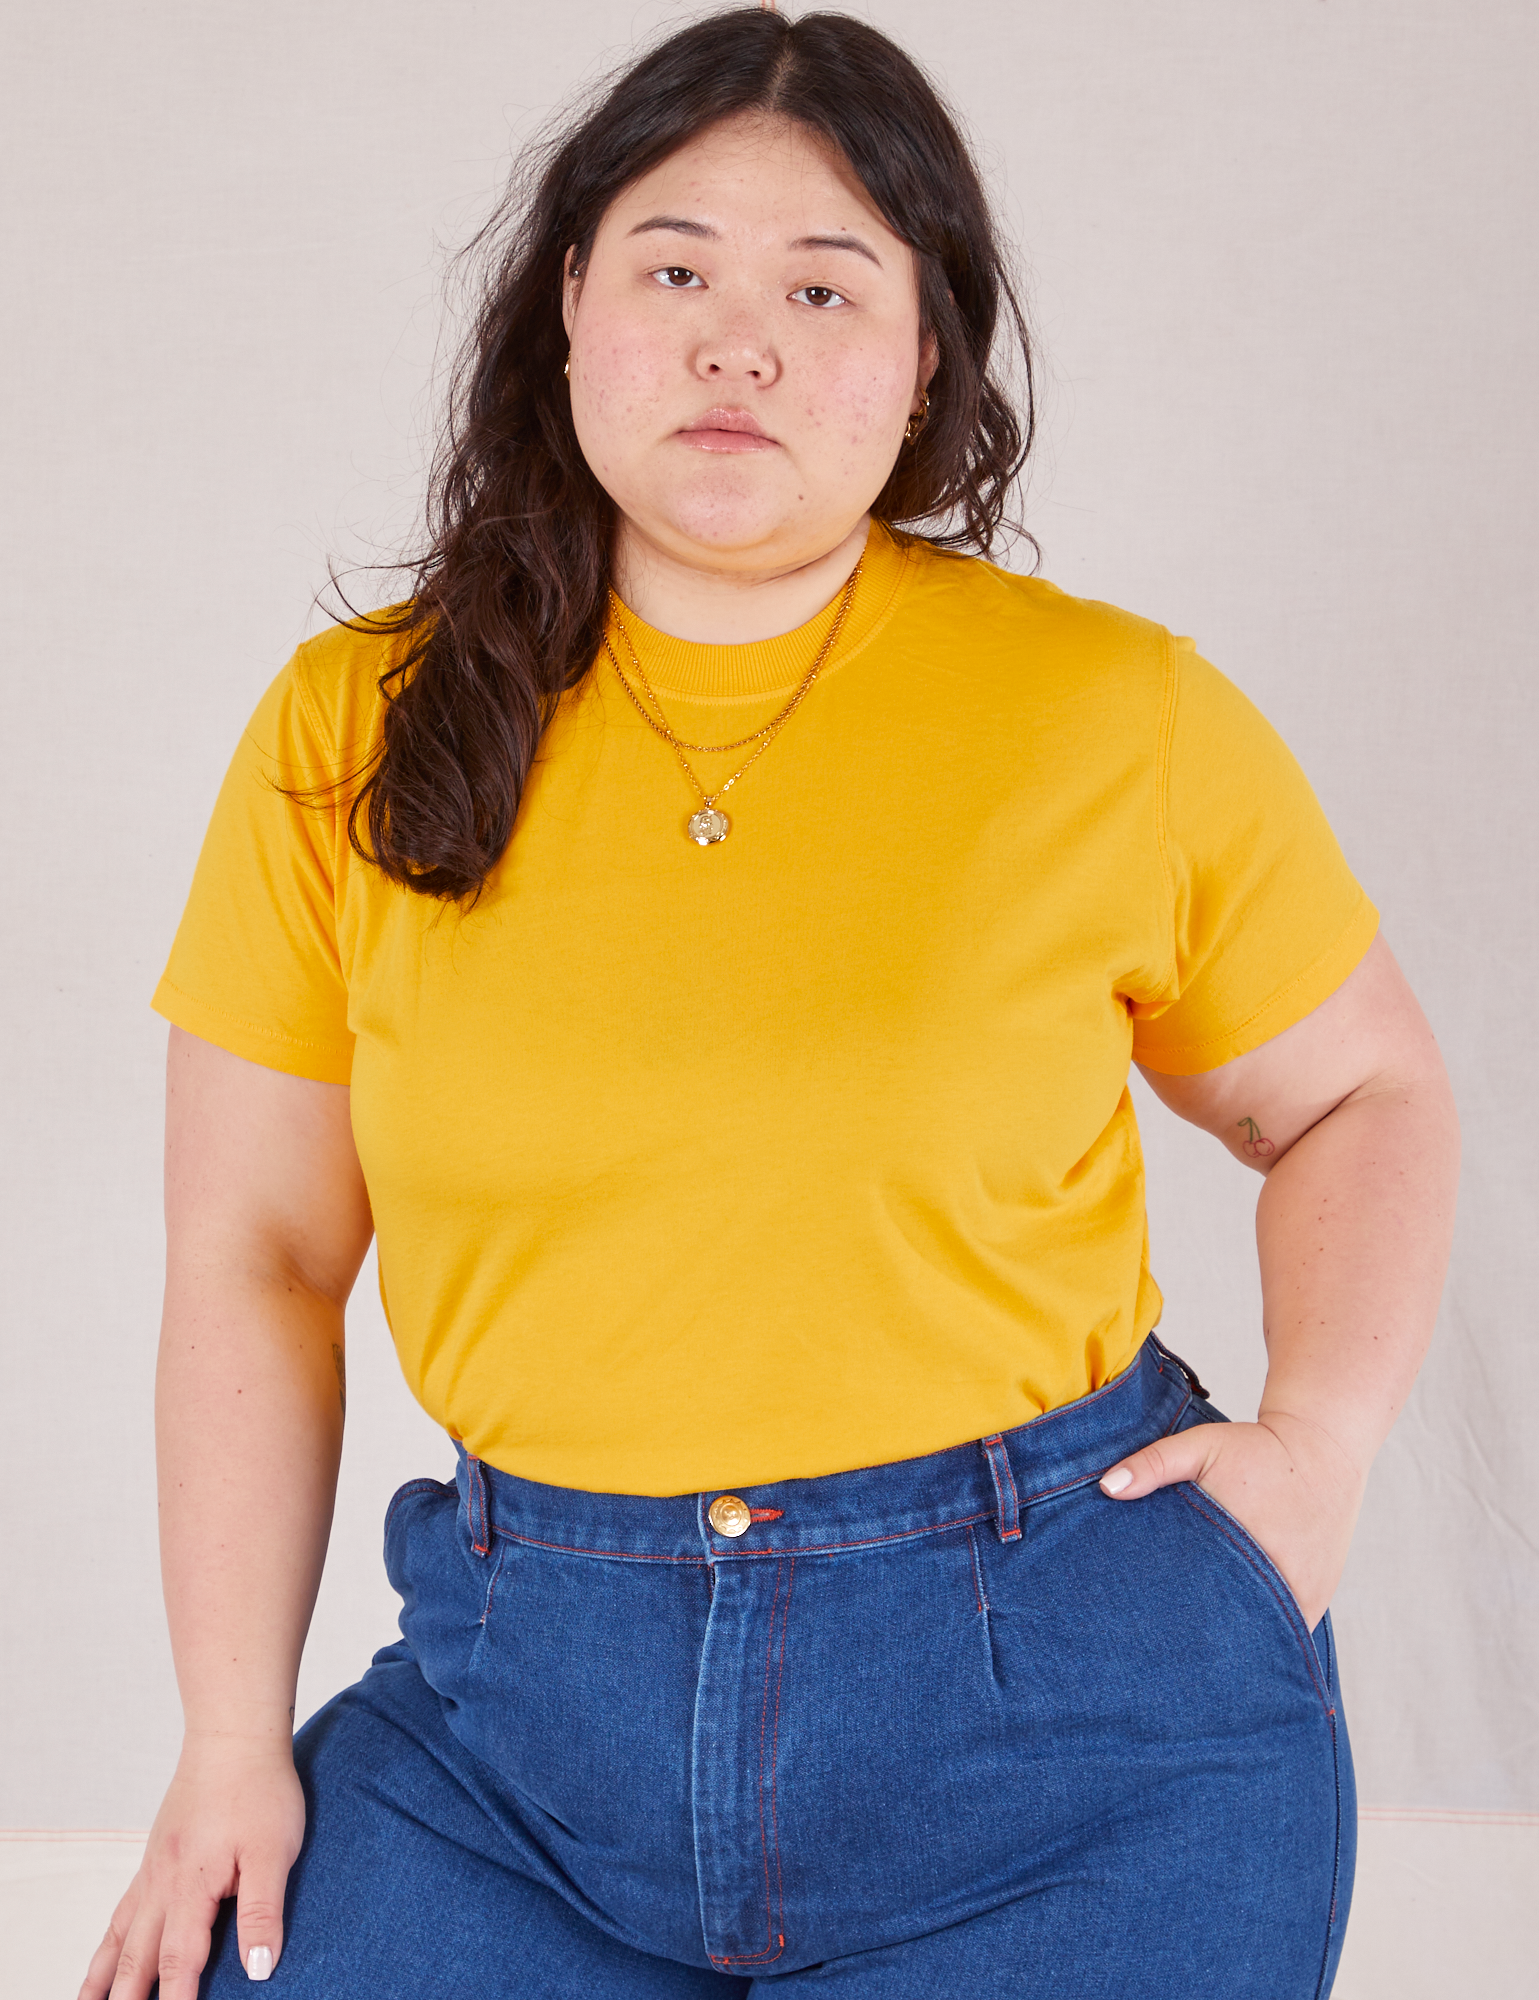 Ashley is 5&#39;7&quot; and wearing L Organic Vintage Tee in Sunshine Yellow tucked into dark wash Trouser Jeans